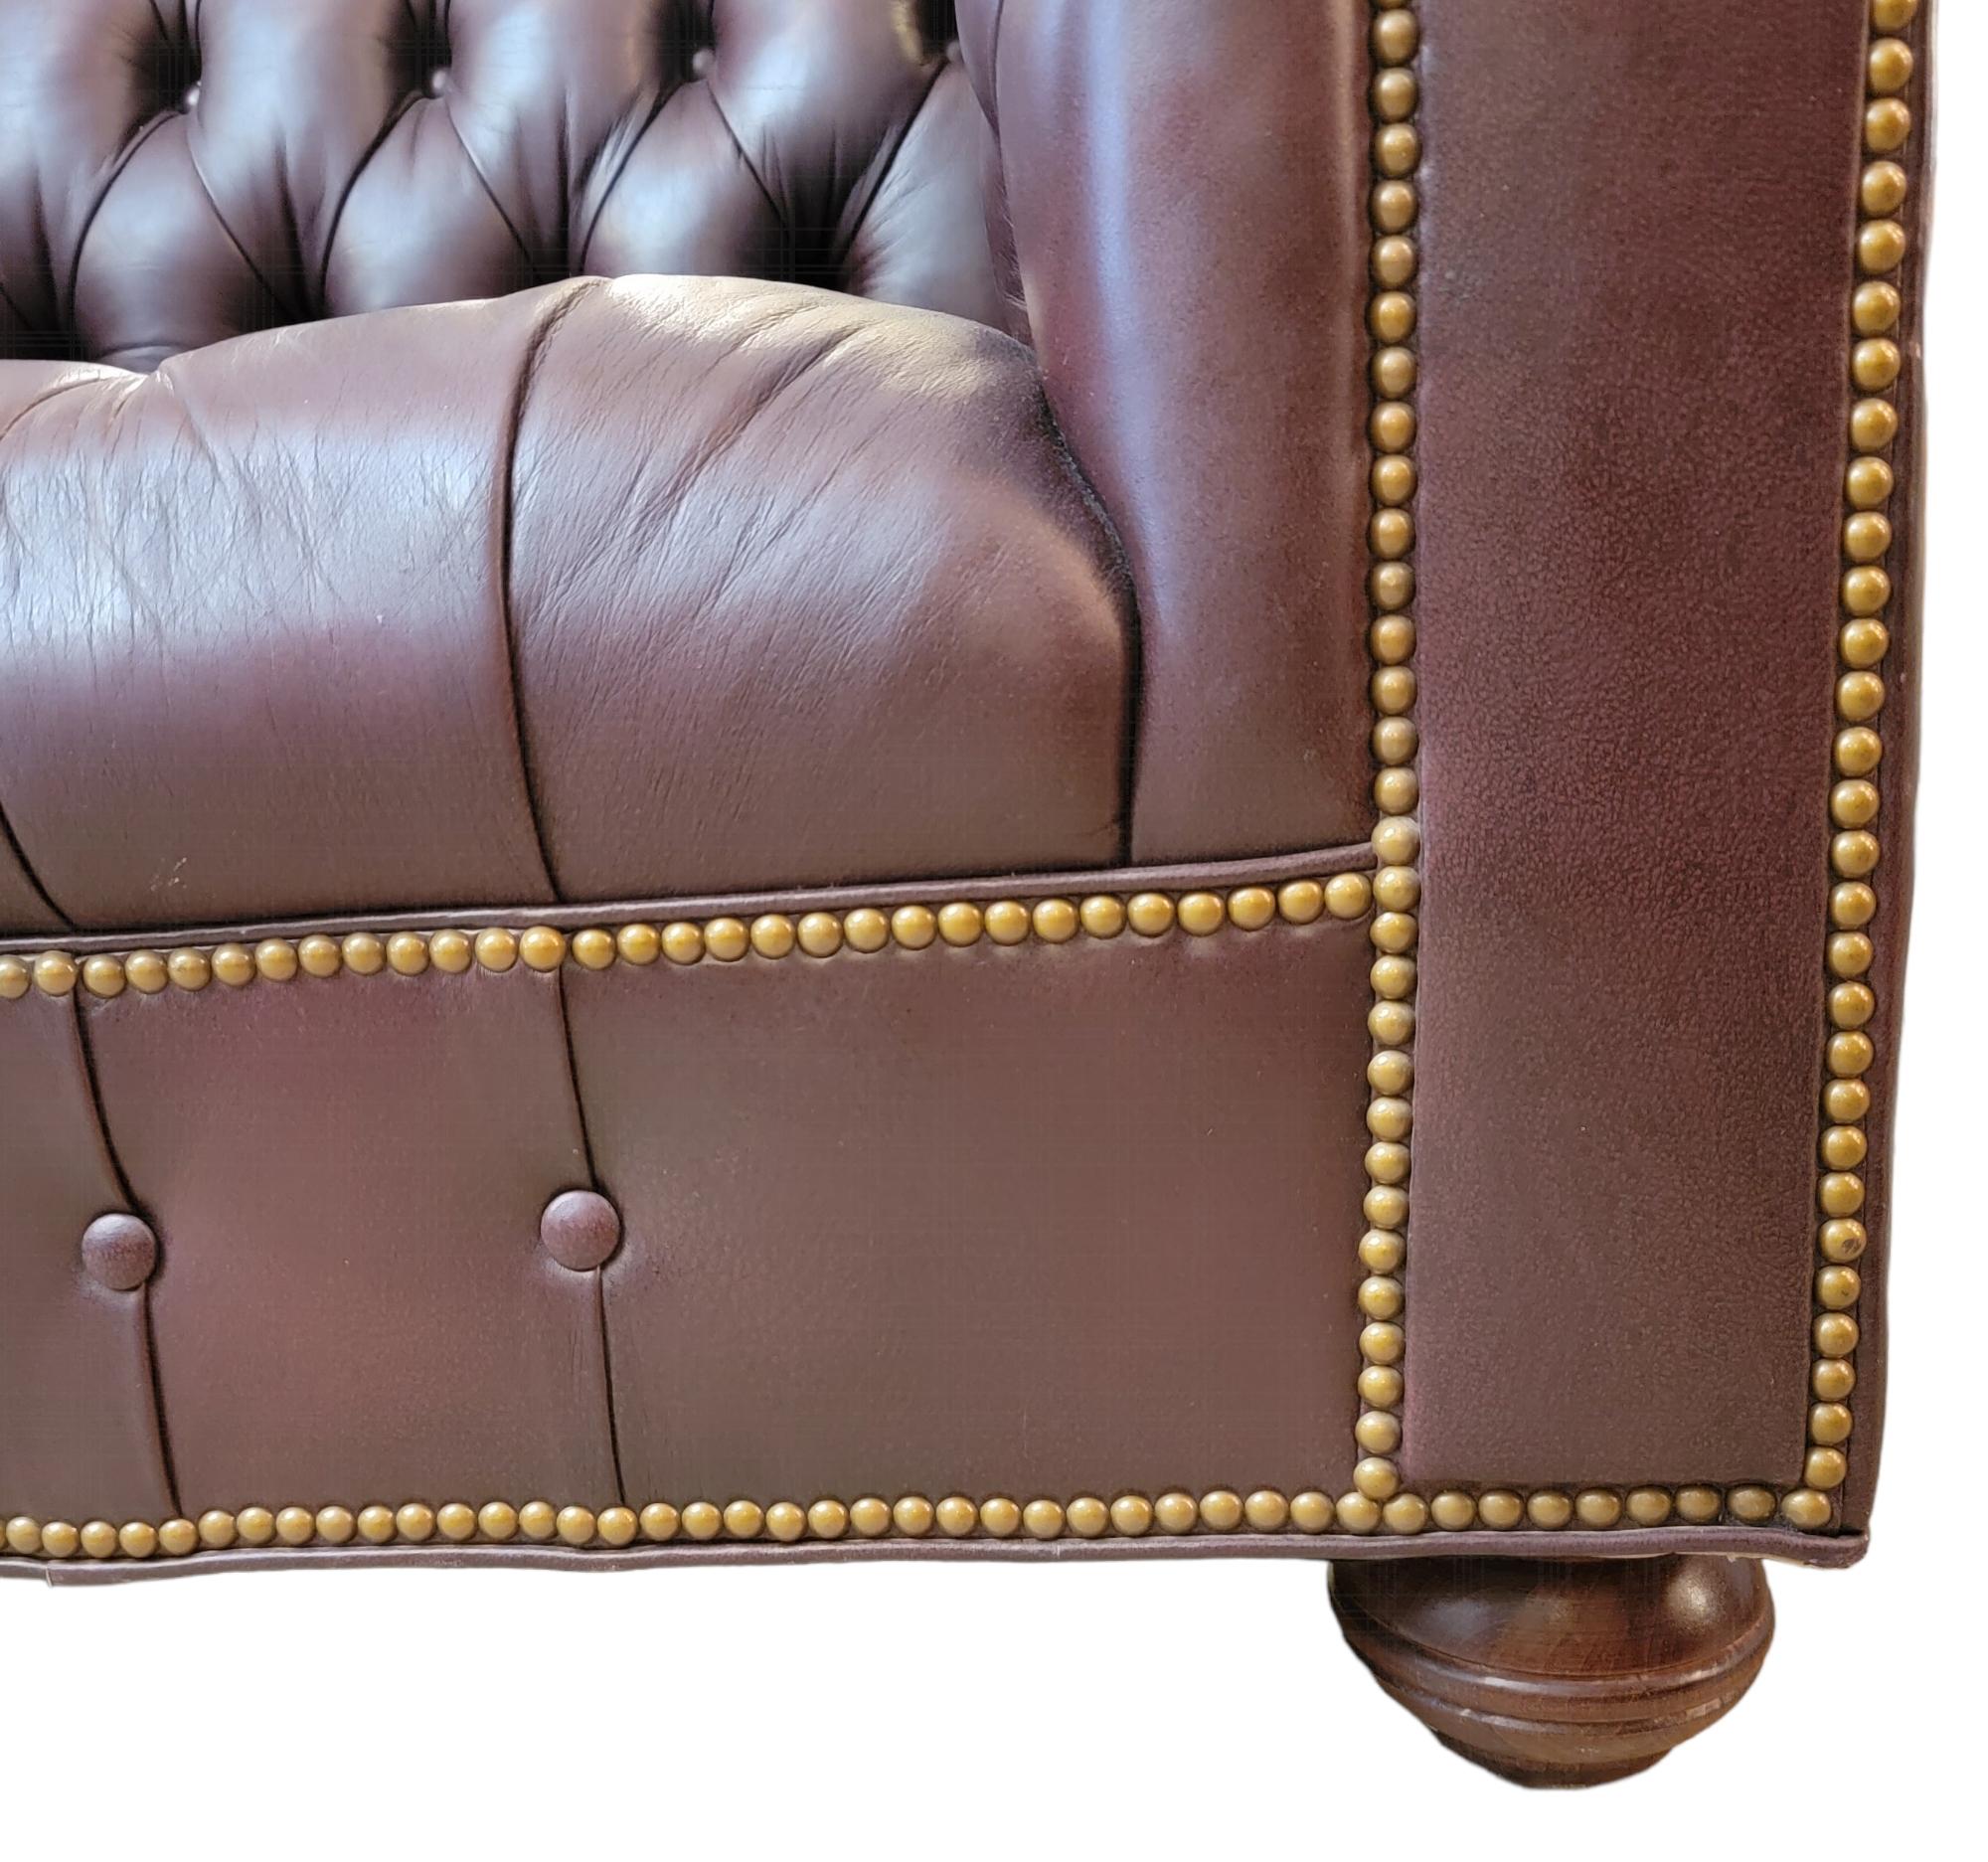 Mid Century 2 Seat chesterfield sofa in a wonderful dark burgundy color with tufted leather and original button knobs, Wonderful Wooden rounded feet.